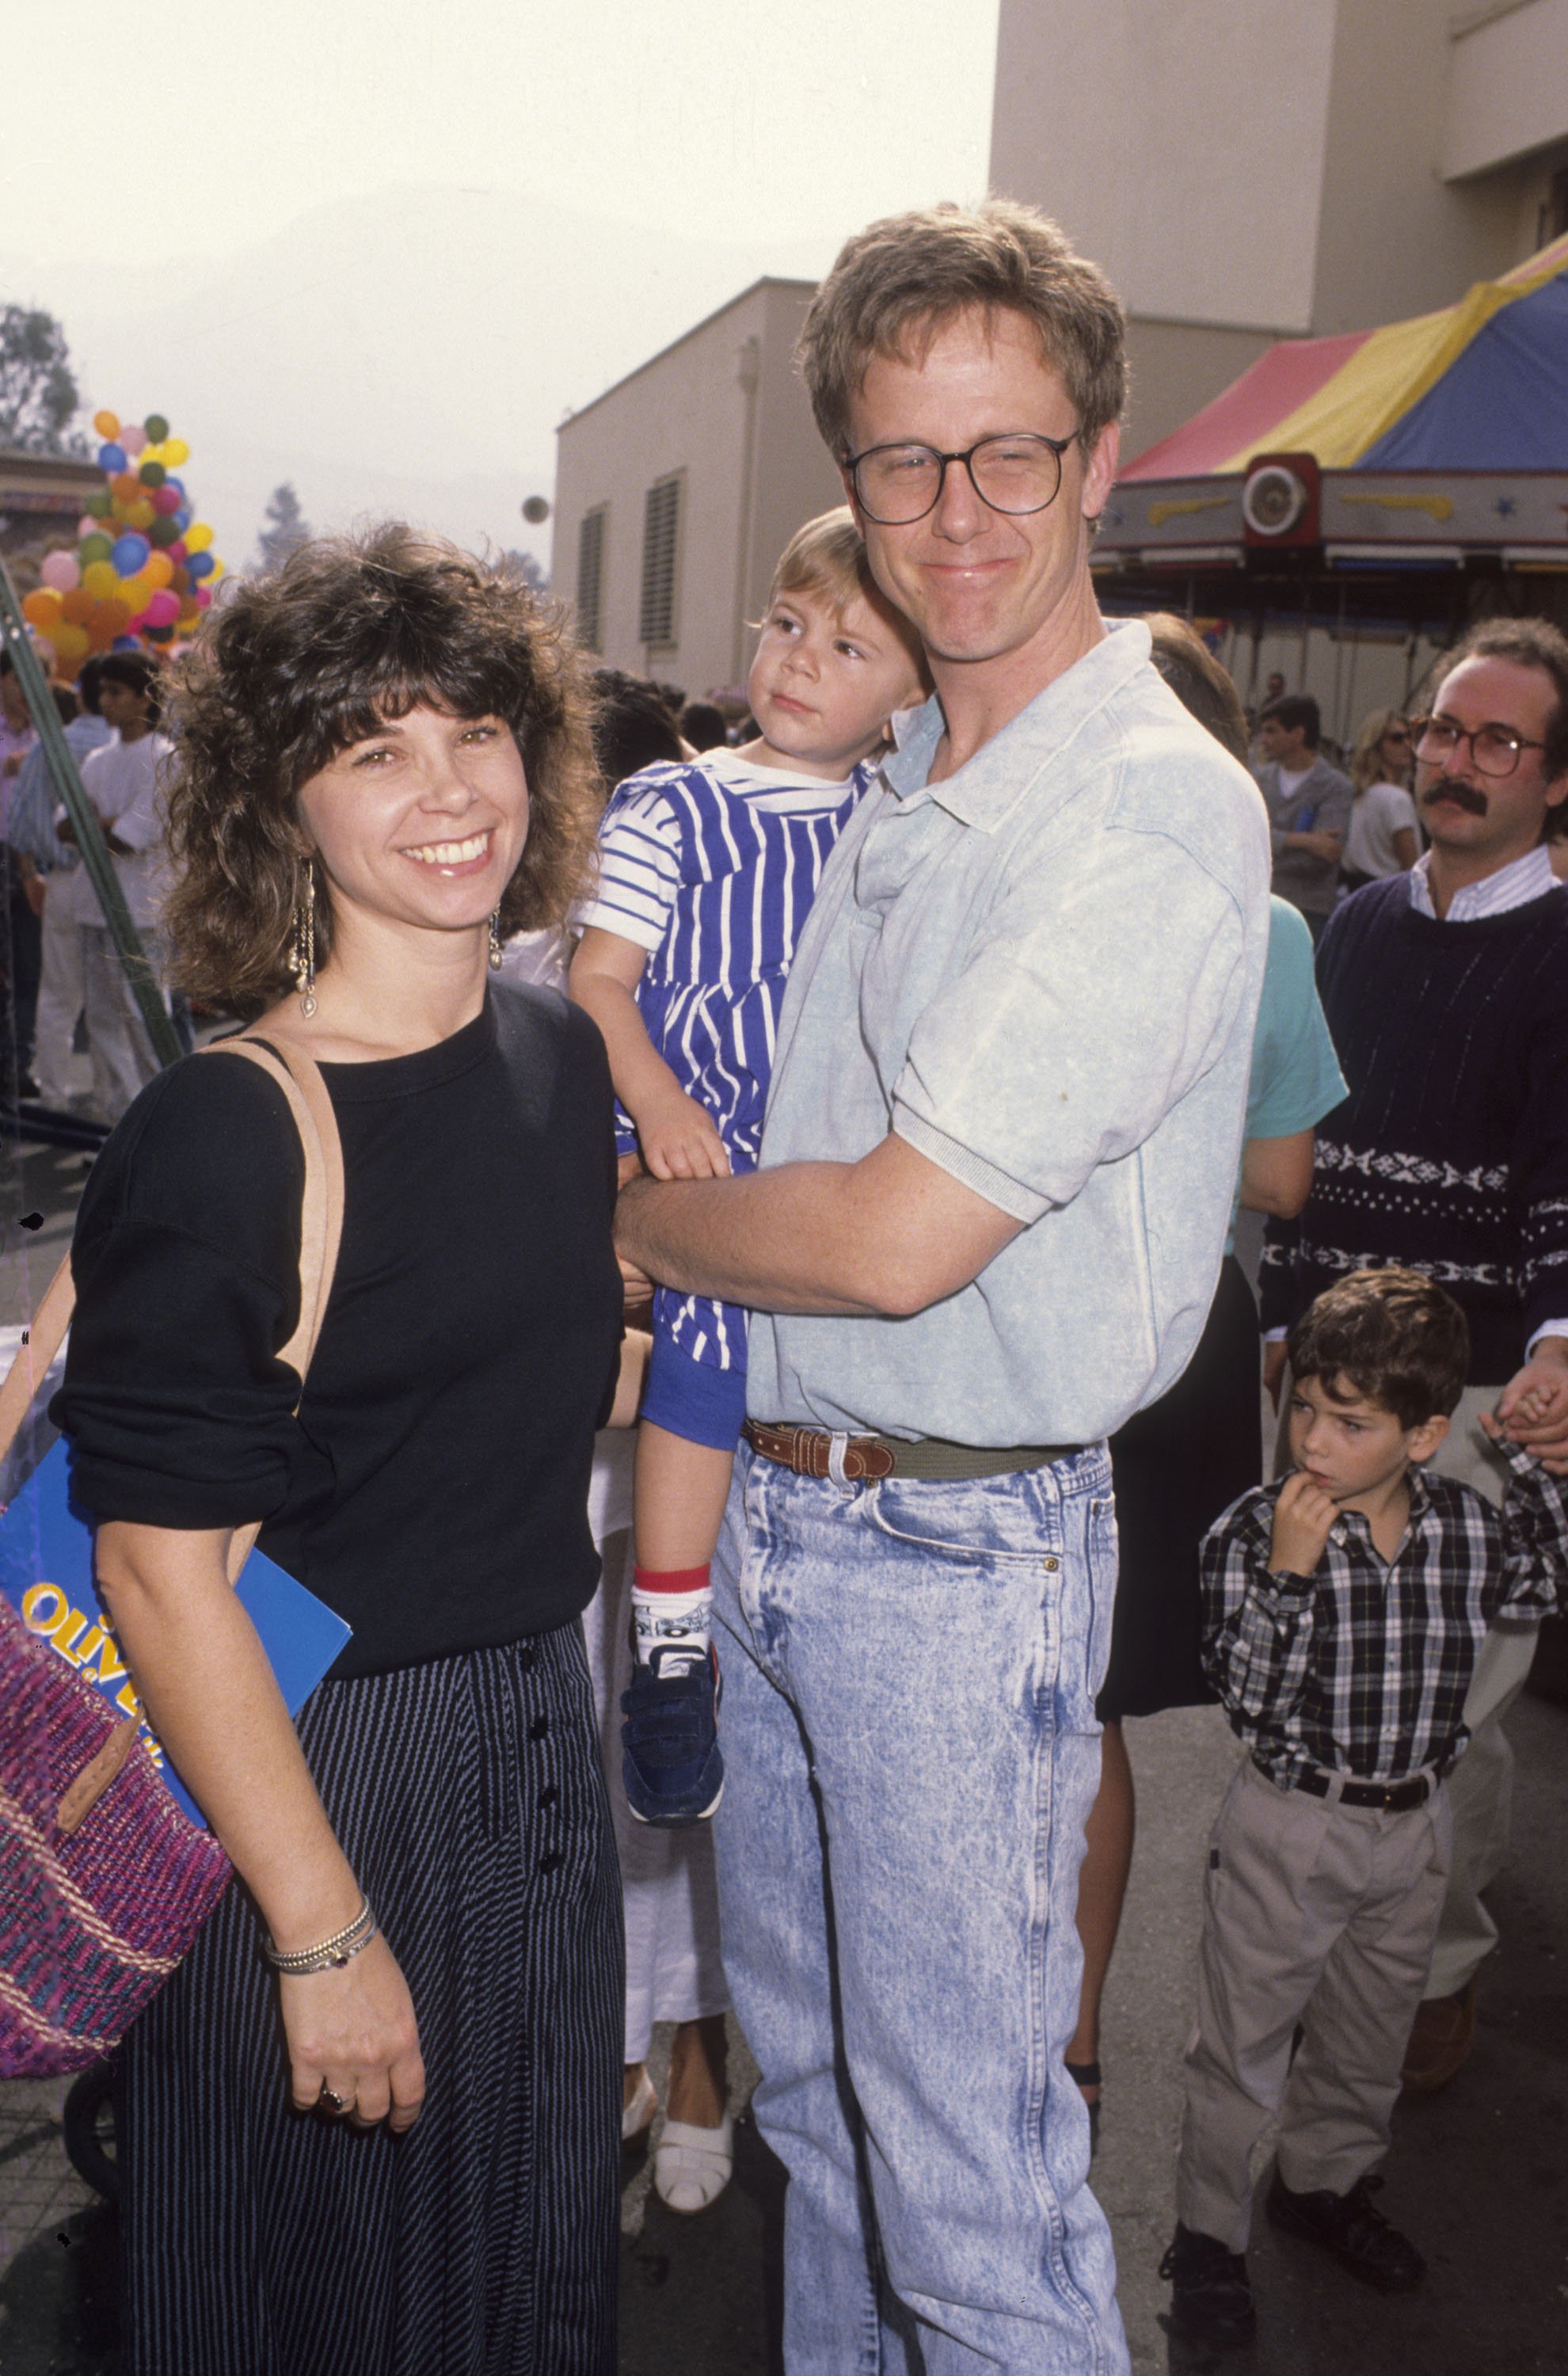 Harry Anderson, wife Leslie Pollack and son Dashiell Anderson attend the premiere of "Oliver and Company" on November 6, 1988 at Disney Studios | Source: Getty Images